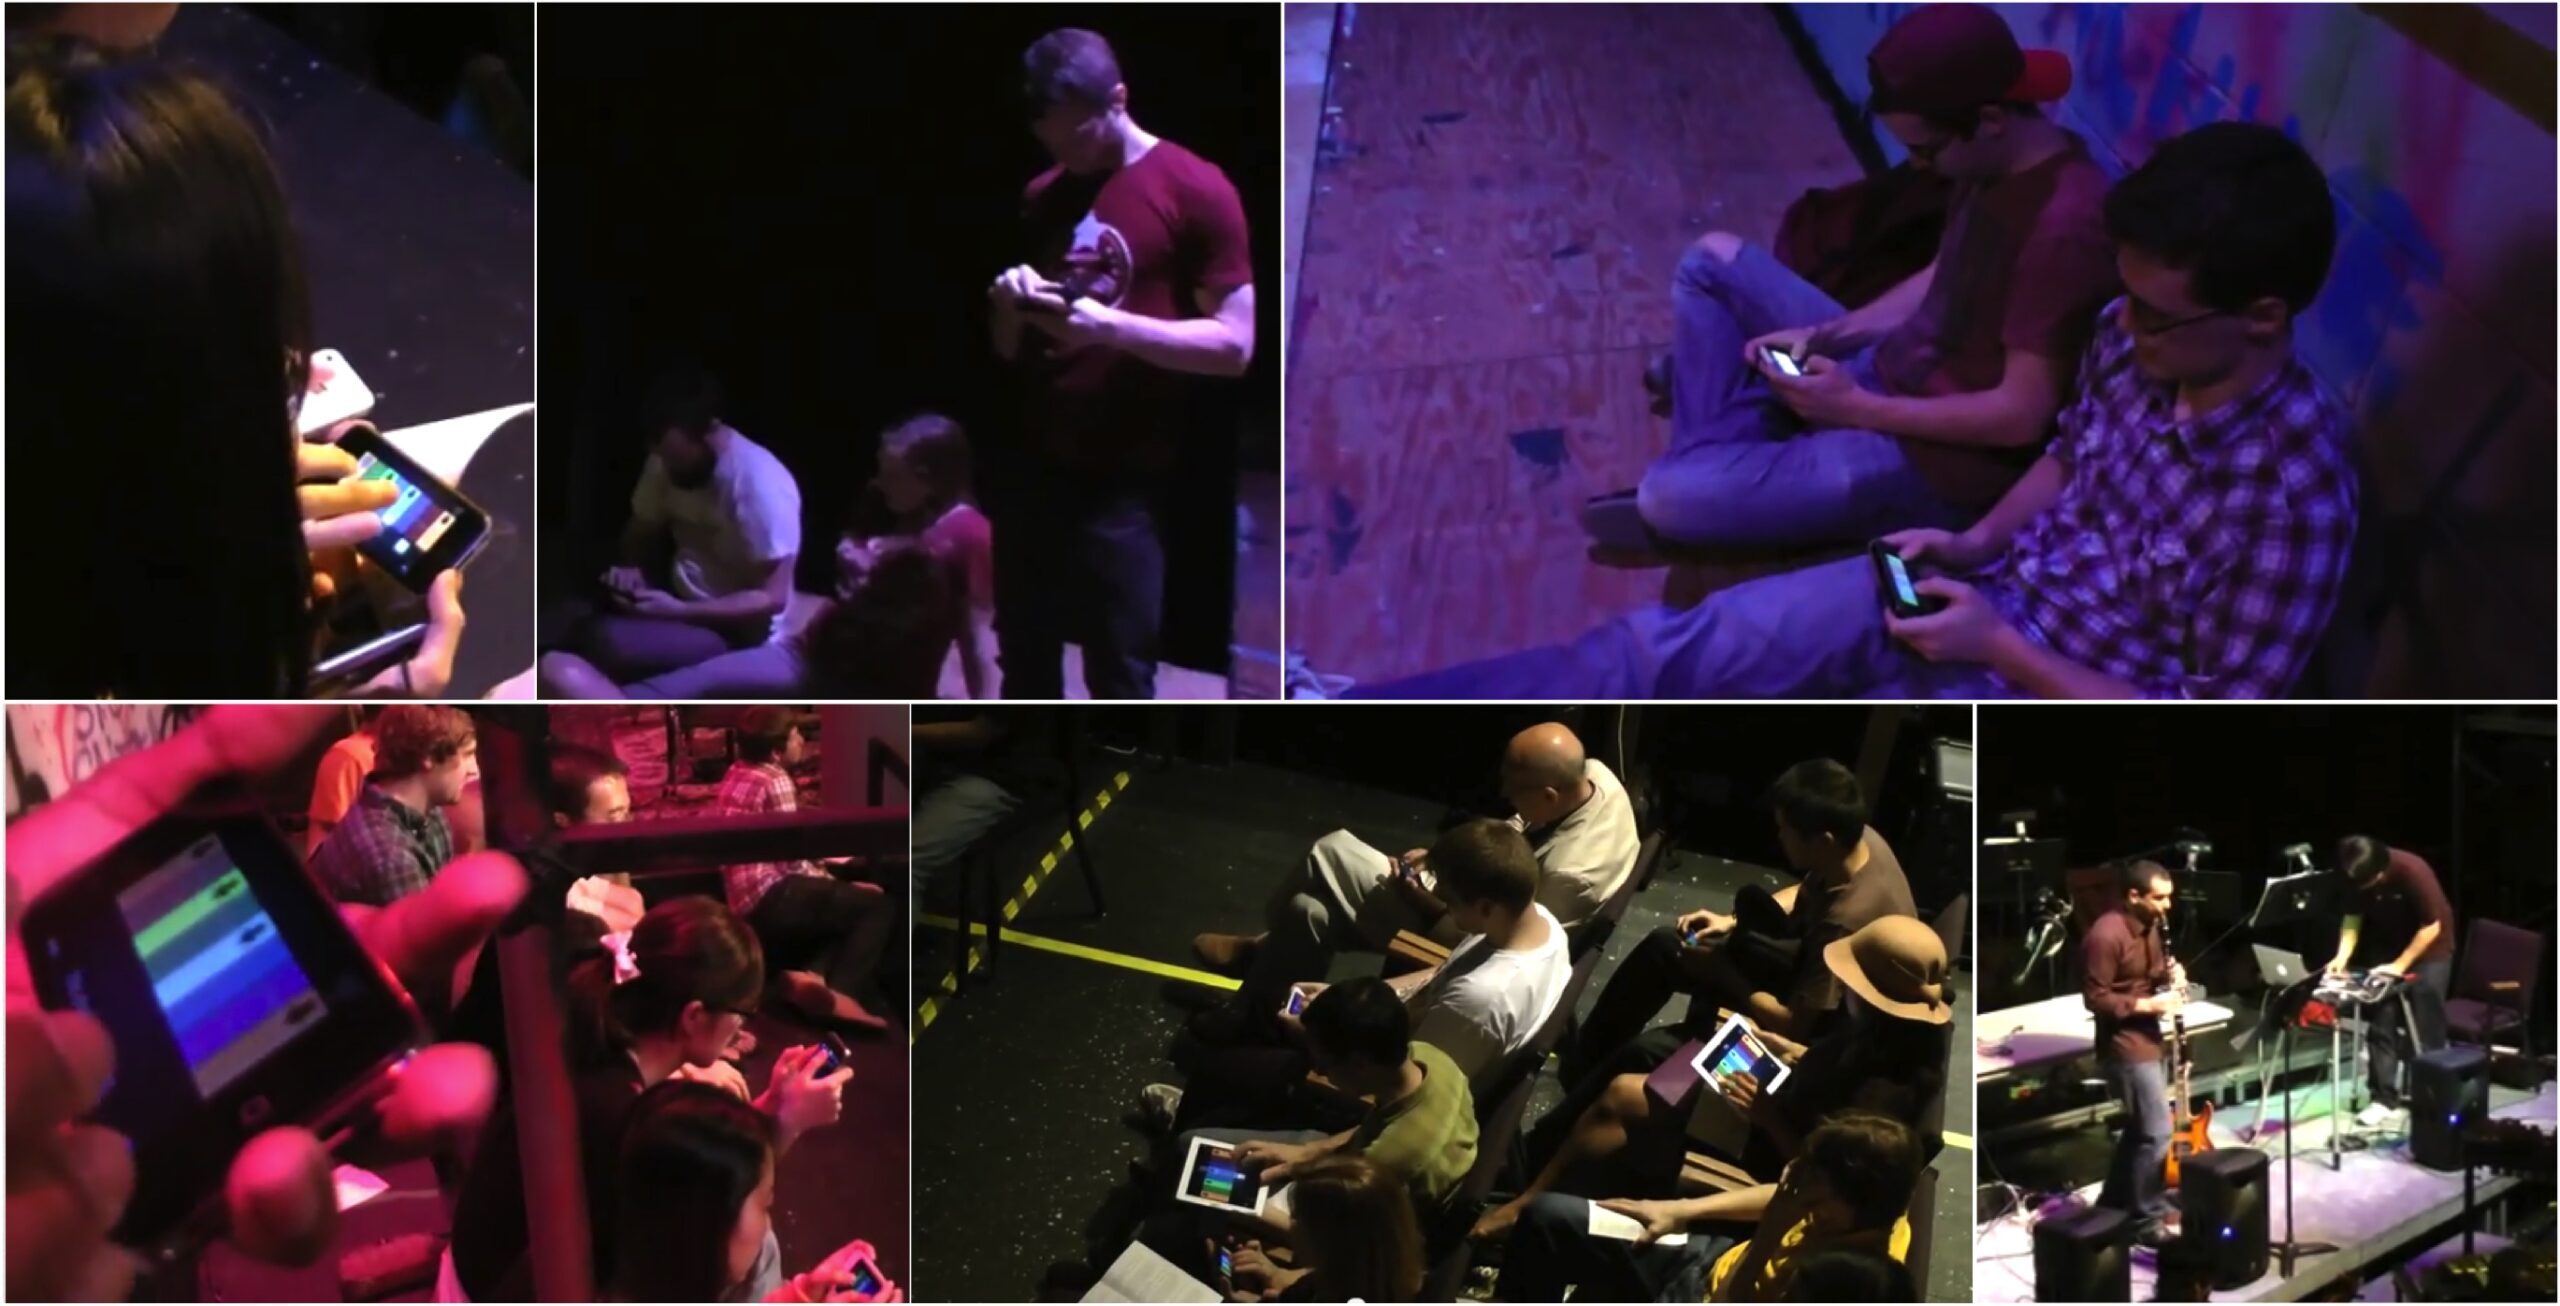 echobo, Networked musical instruments for audience participation